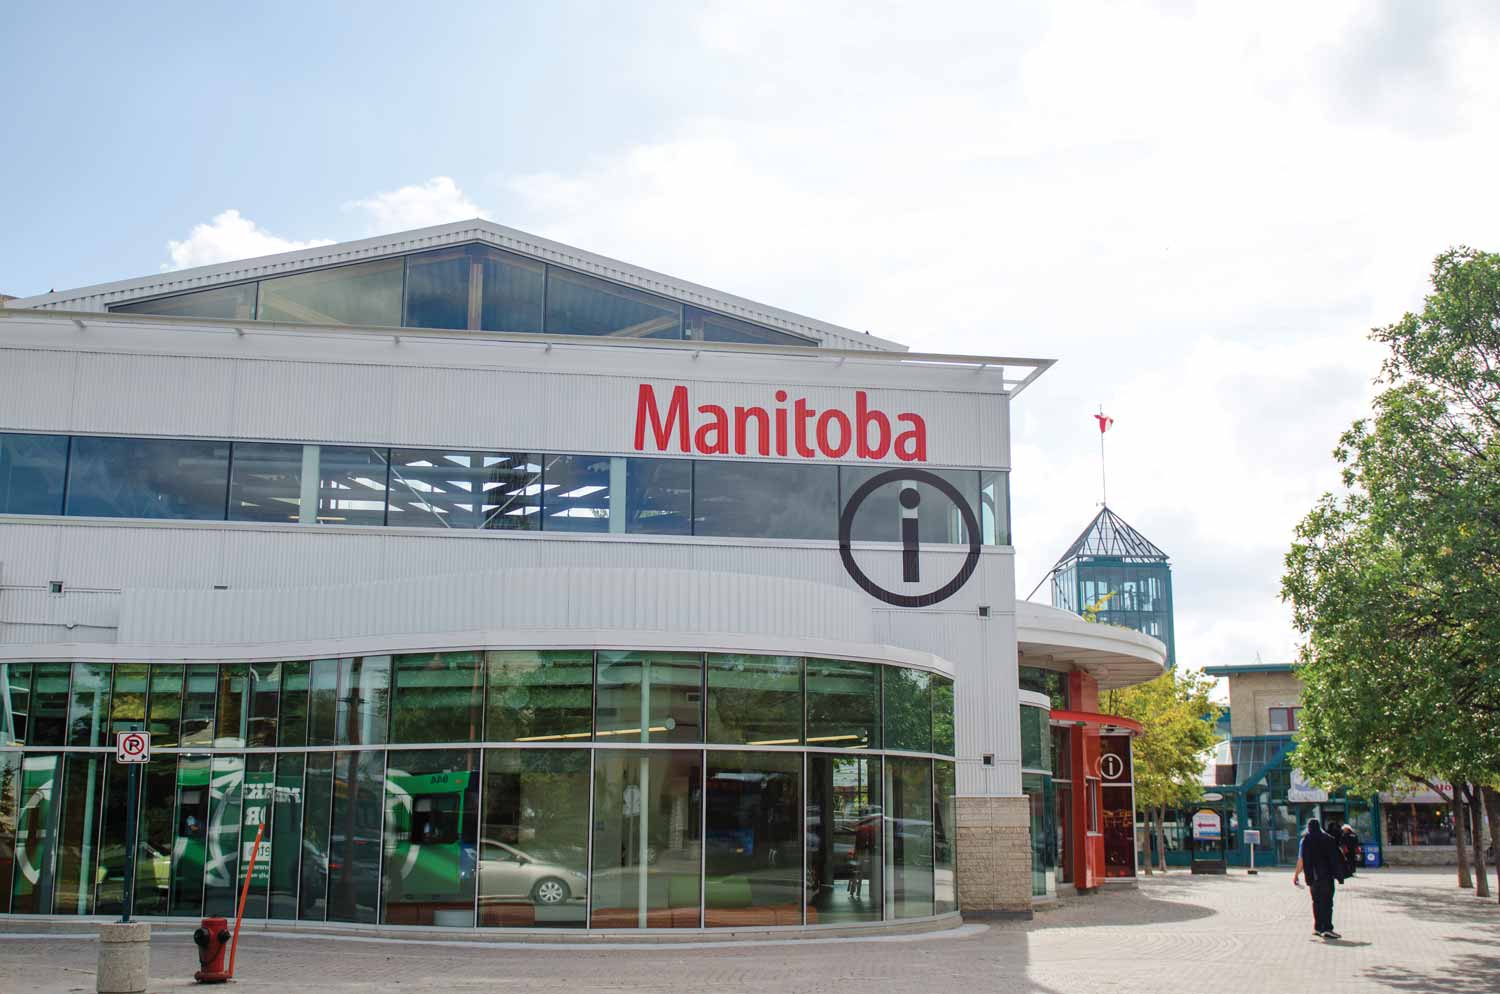 Travel Manitoba's glass windows are reflecting vehicles from the street. The Forks Market tower can be seen in the background.